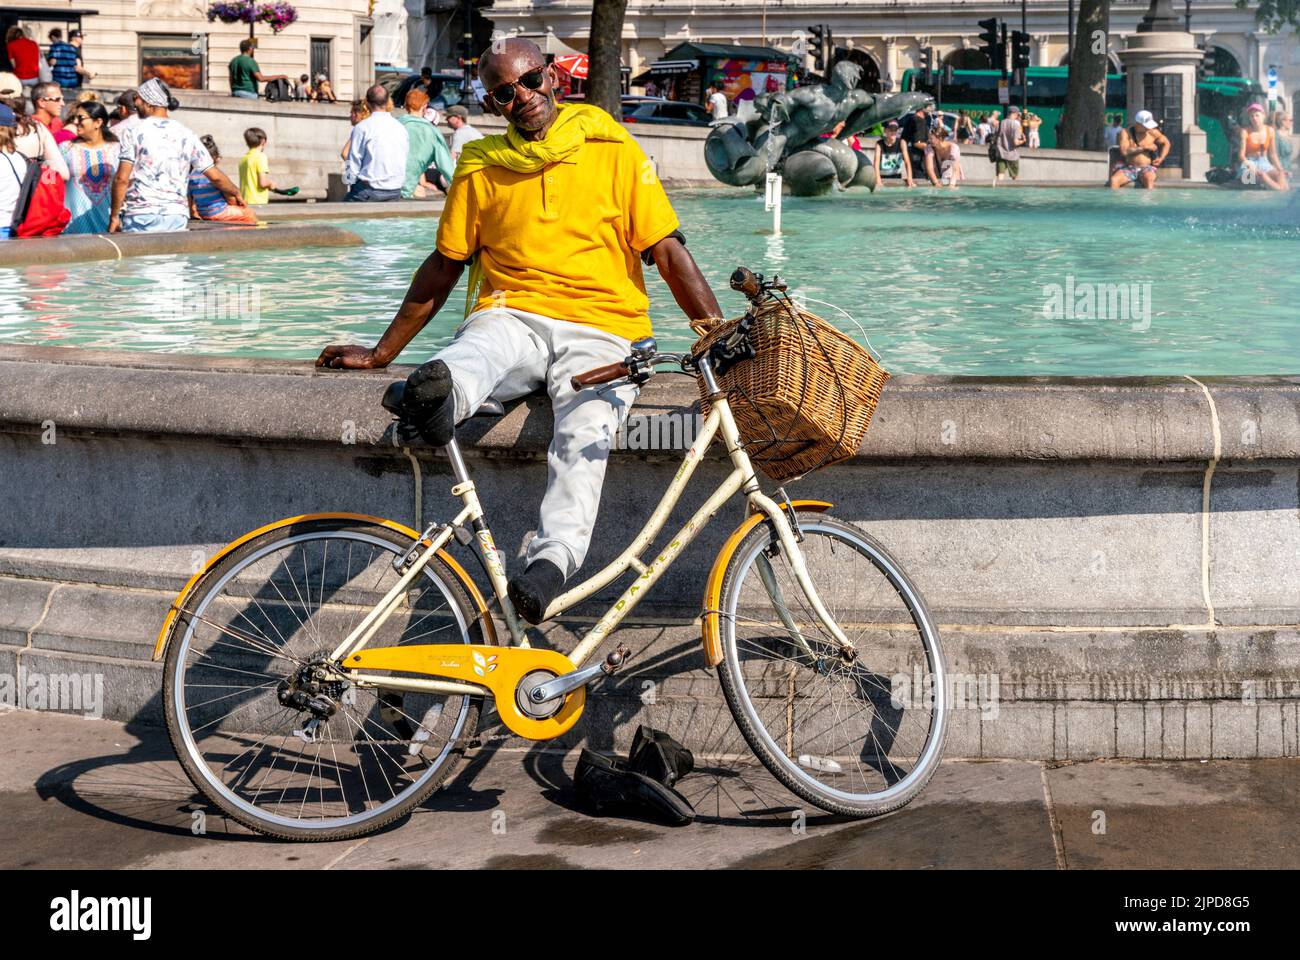 A Local Man Cools Off At The Fountains In Trafalgar Square During The Hottest Day Ever Recorded In The Capital, London, UK Stock Photo